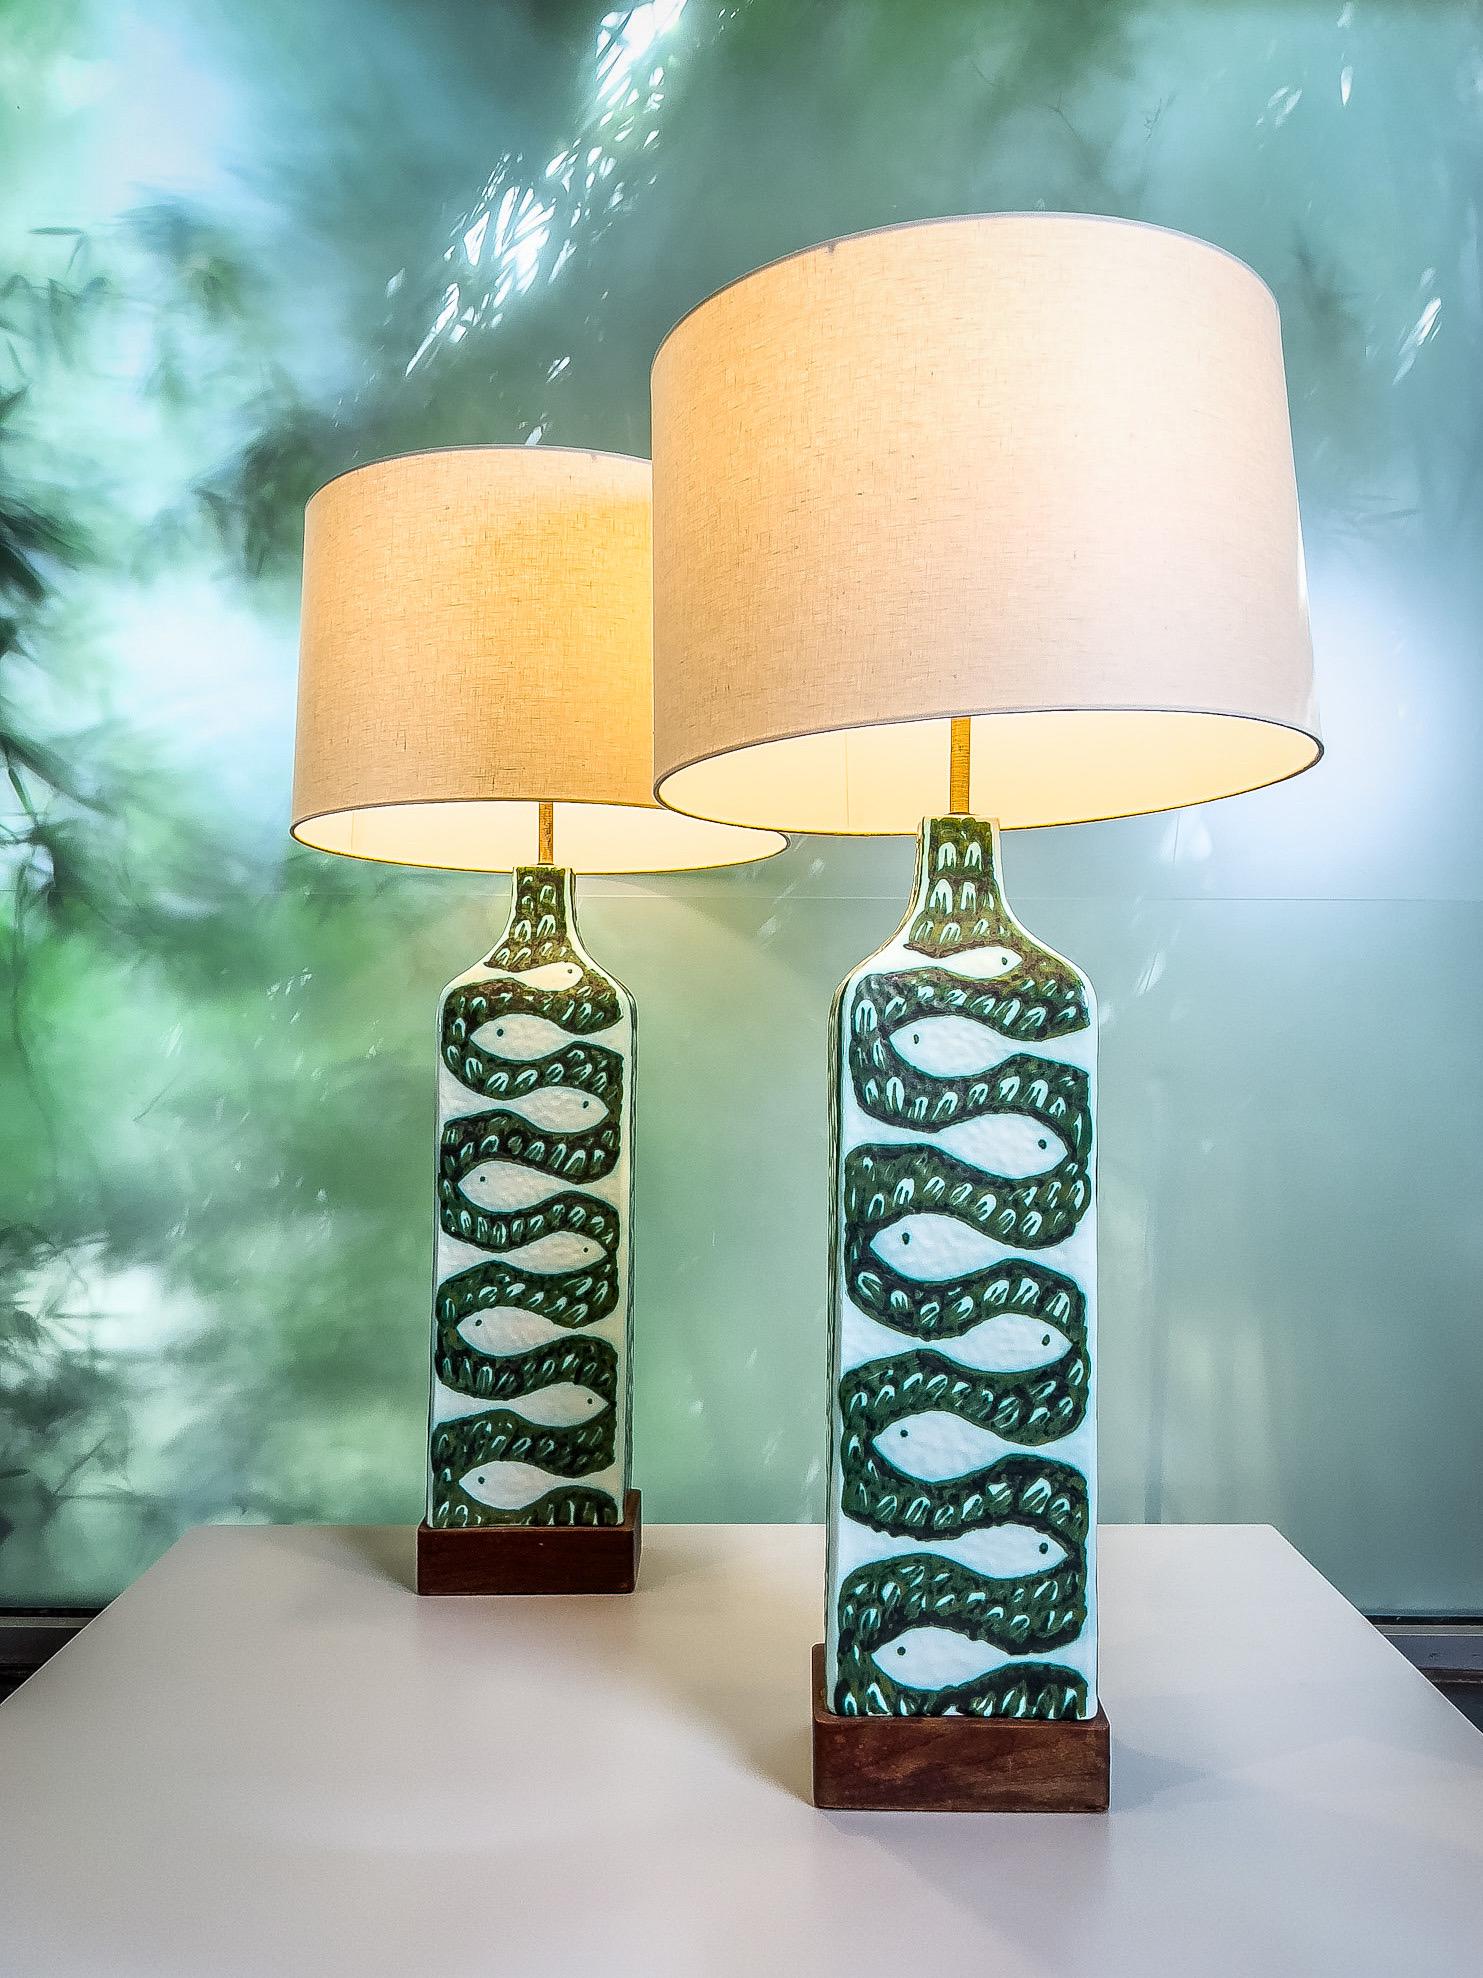 Large Pair of Ceramic Lamps by Alessio Tasca for Raymor For Sale 2